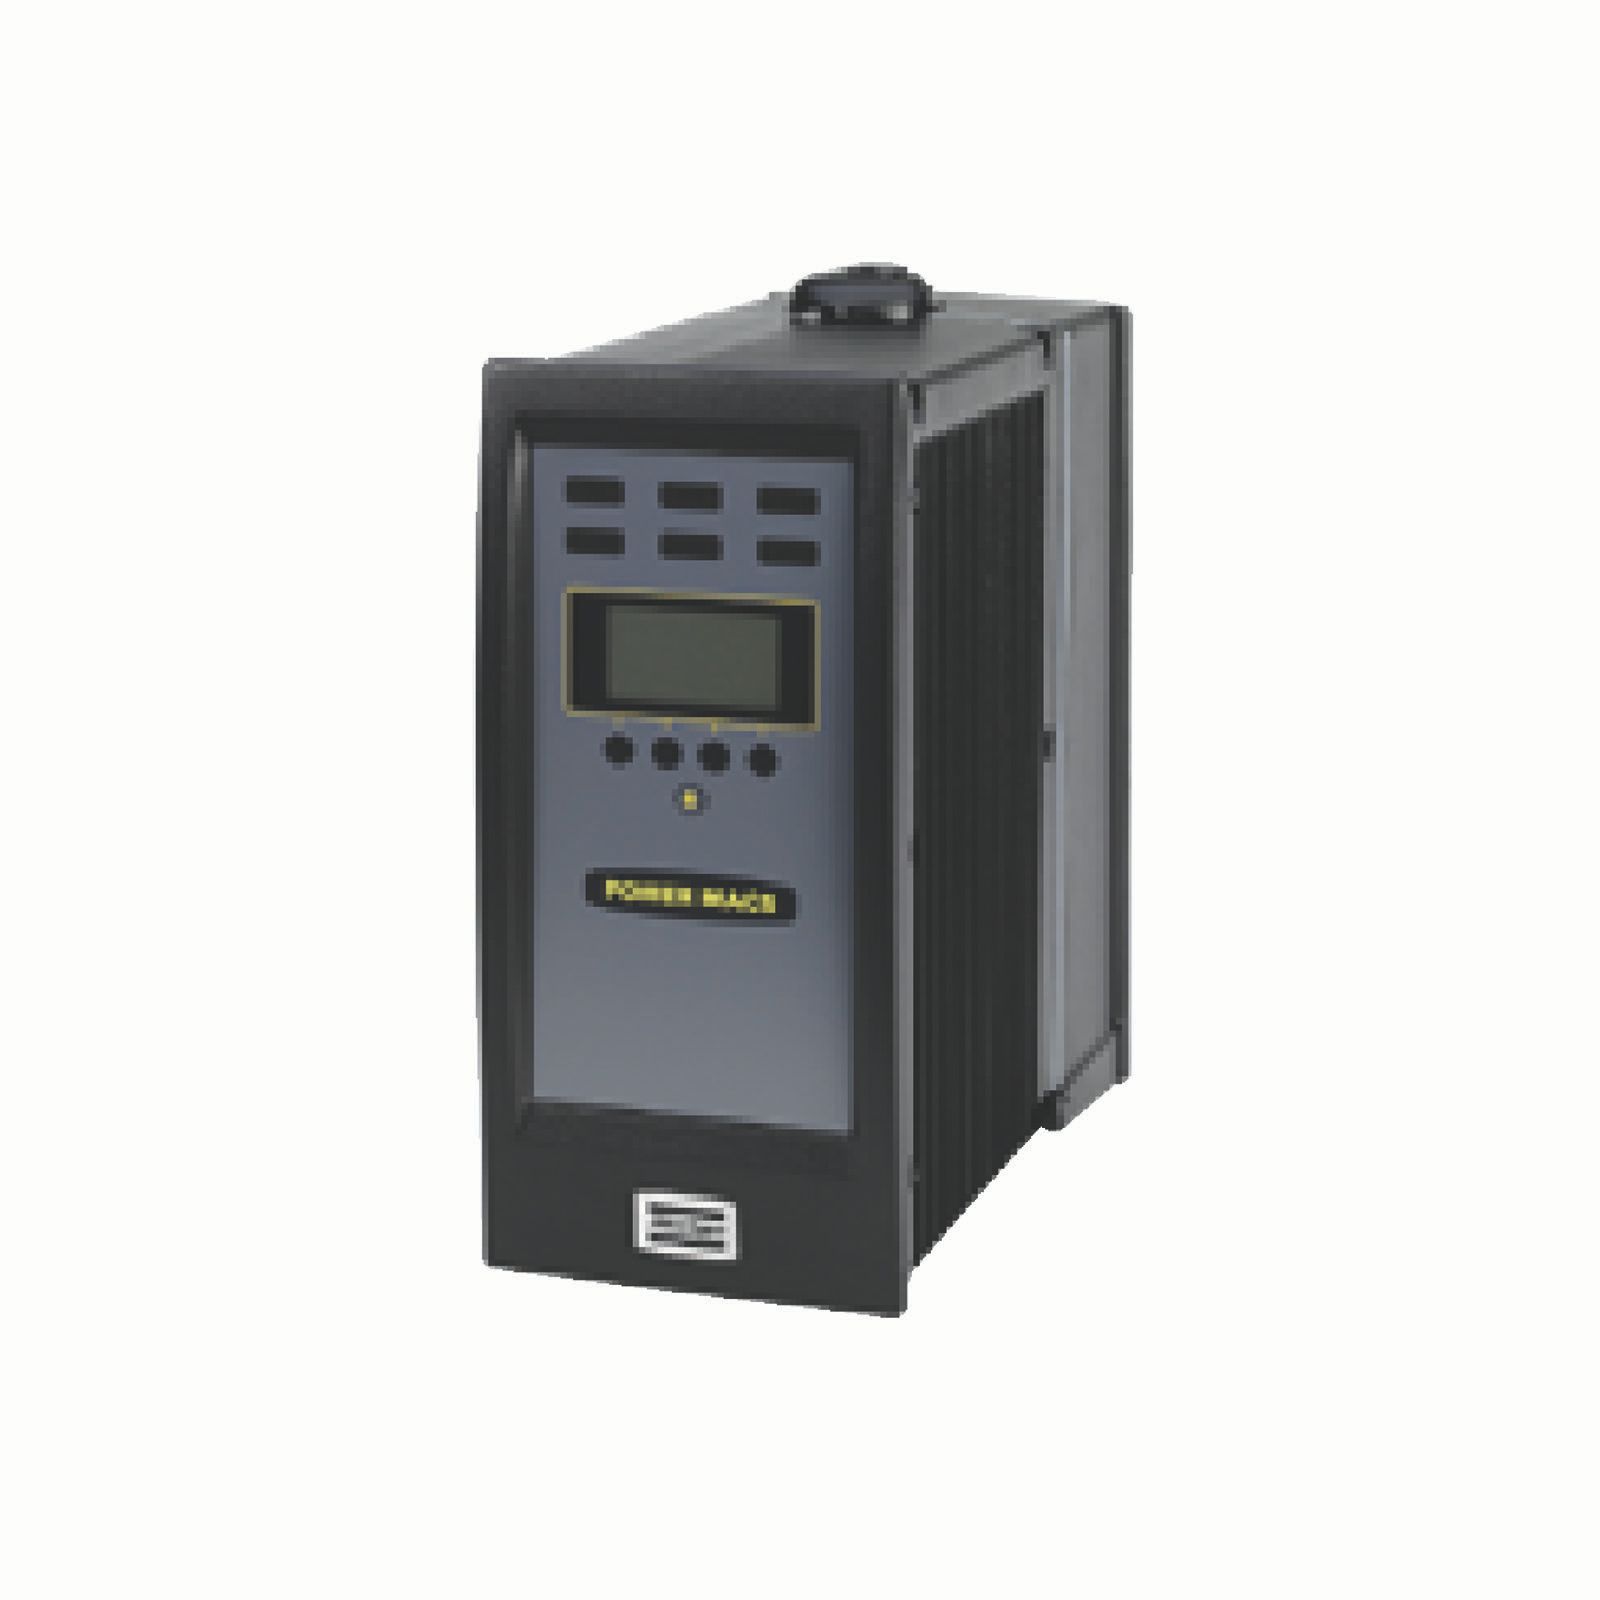 Primary TC4000 EthernetIP 2P product photo